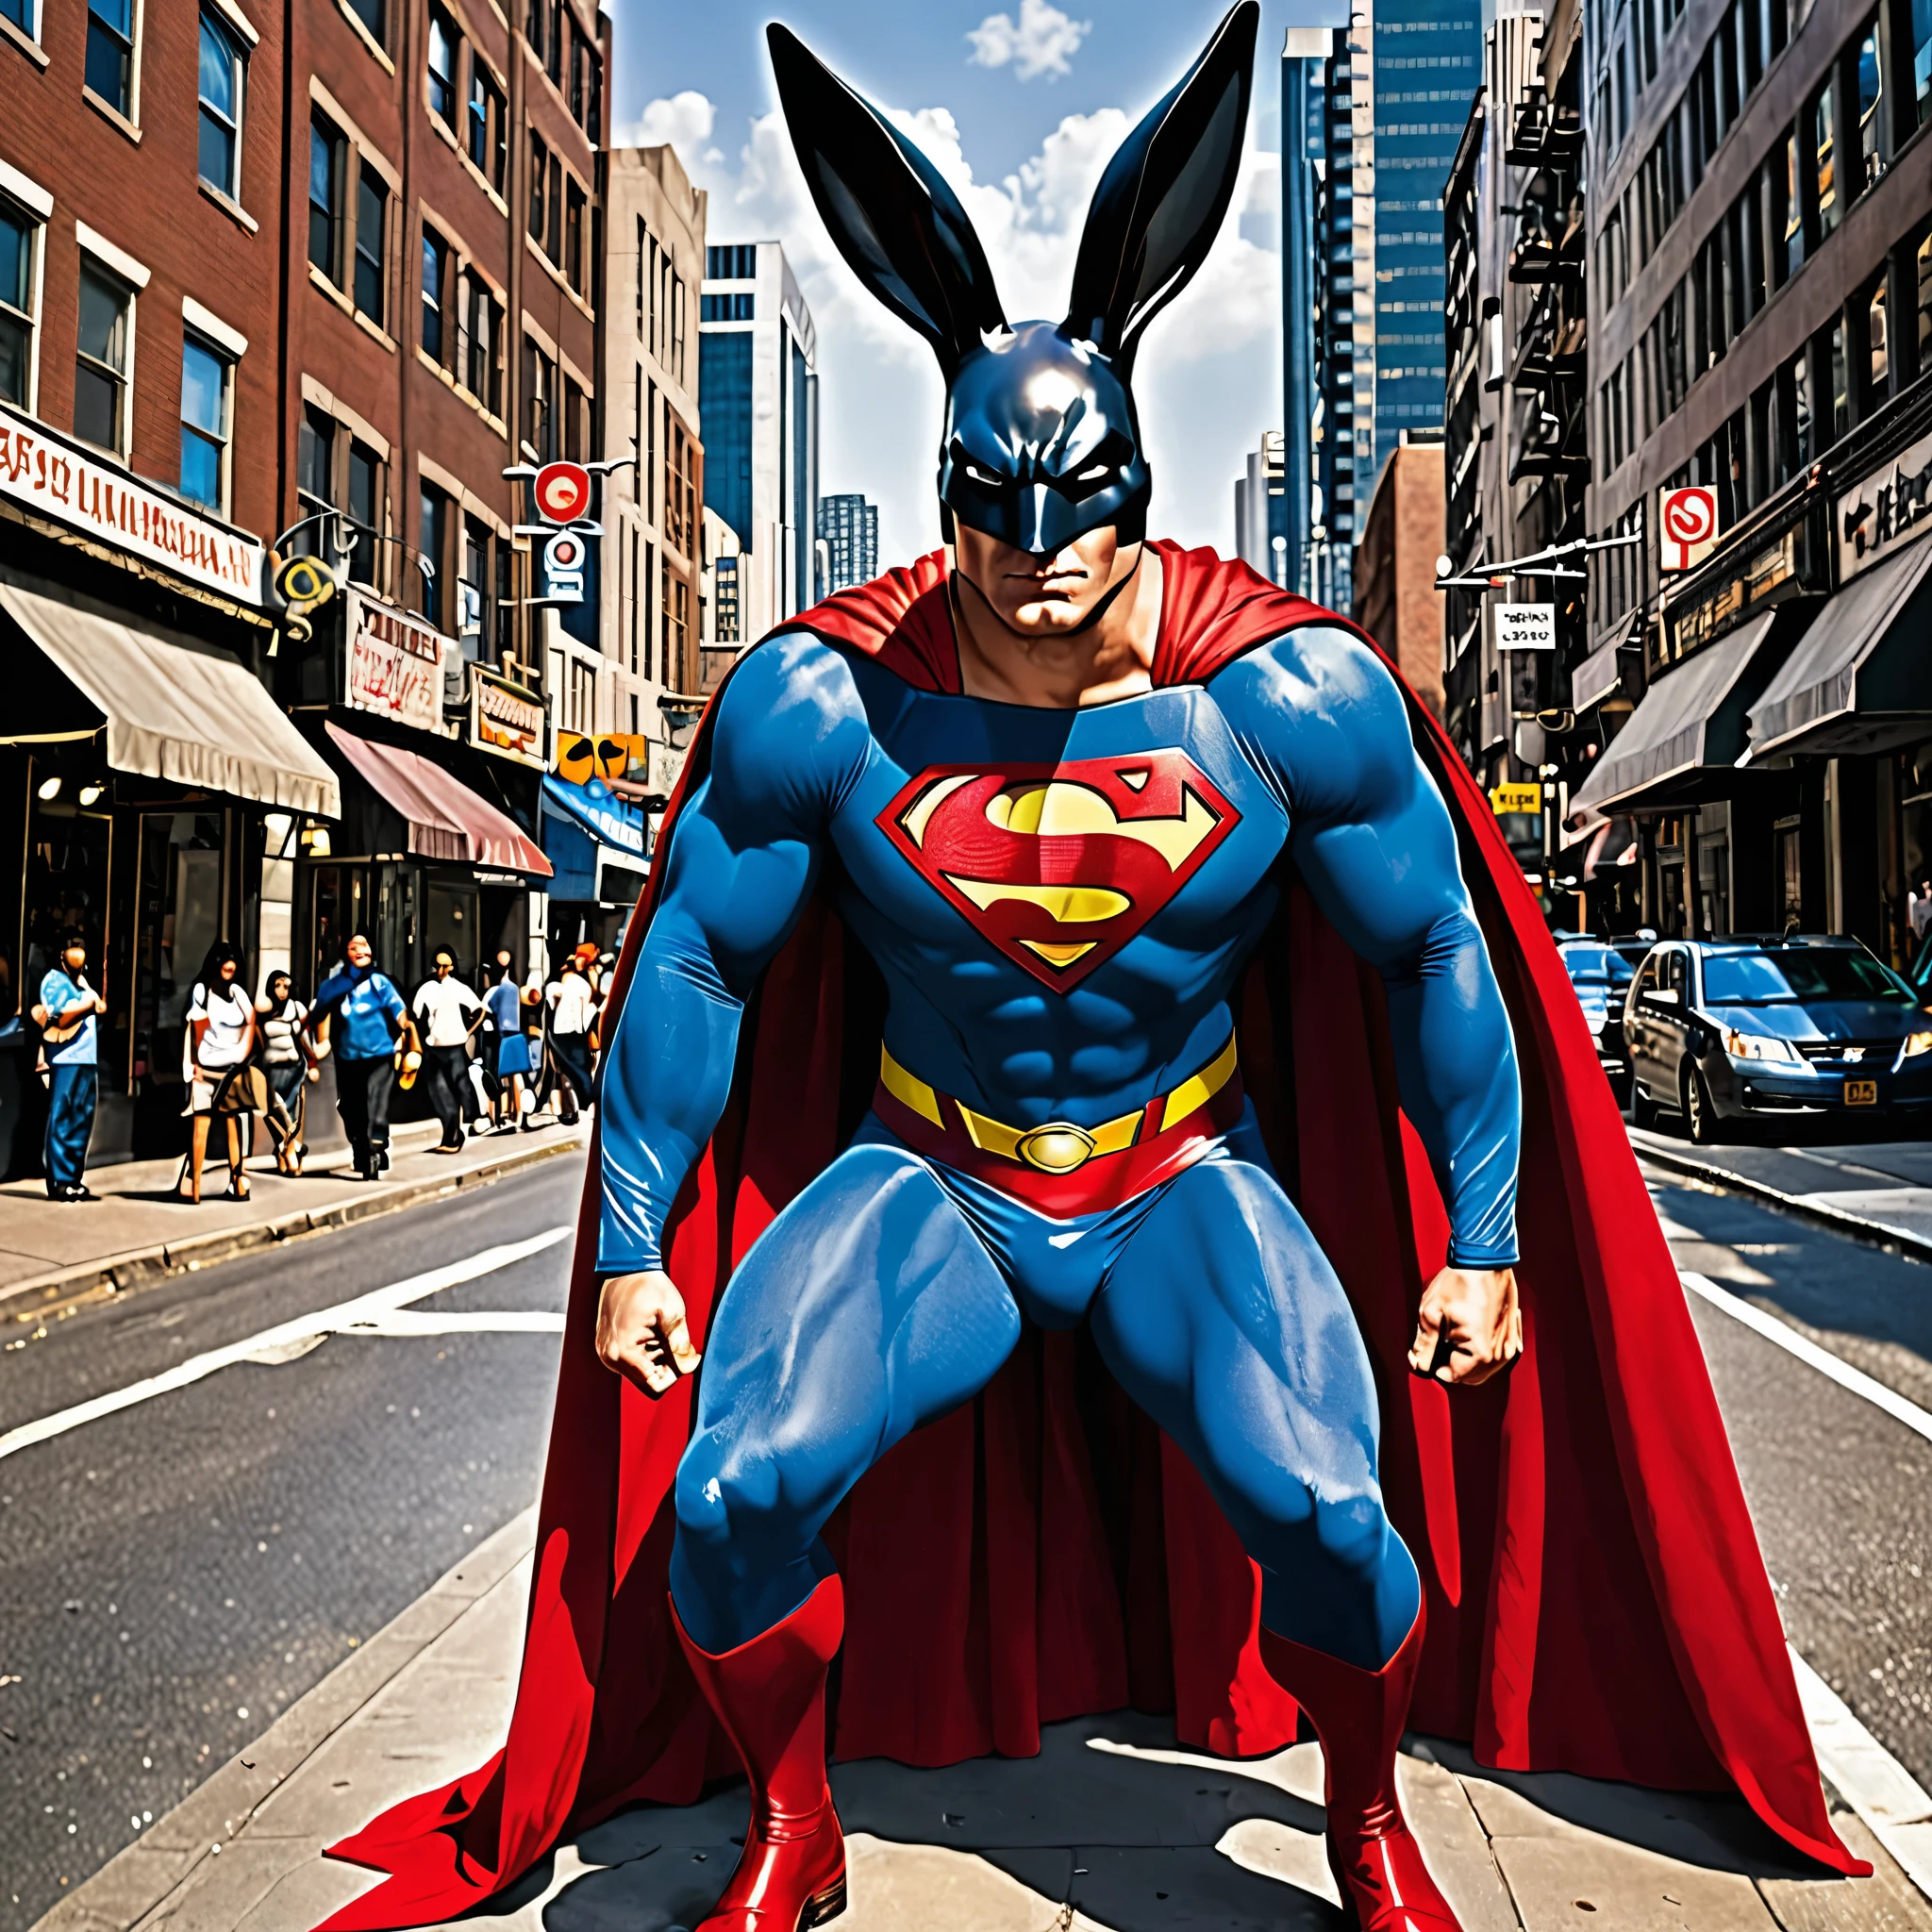 (bunny ear),Superman, the guardian wearing a red cloak, appears in the city today with a special image of wearing rabbit ears. With extraordinary power, he upholds justice and mercilessly punishes criminals. On the street, he quickly subdued the thief who threatened innocent passersby with a knife and warned him to reform. Superman, the guardian of this city, has won people's respect and admiration for his kindness and justice. Superman, Rabbit Ear, presides over justice, punishment, criminals, red cloaks, extraordinary power, city, streets, shadows, thieves, sharp knives, innocent, passersby, uniform, admonition, reform, police, education, young people, patrols, guardians, tall and sacred,(masterpiece, best quality:1.2)